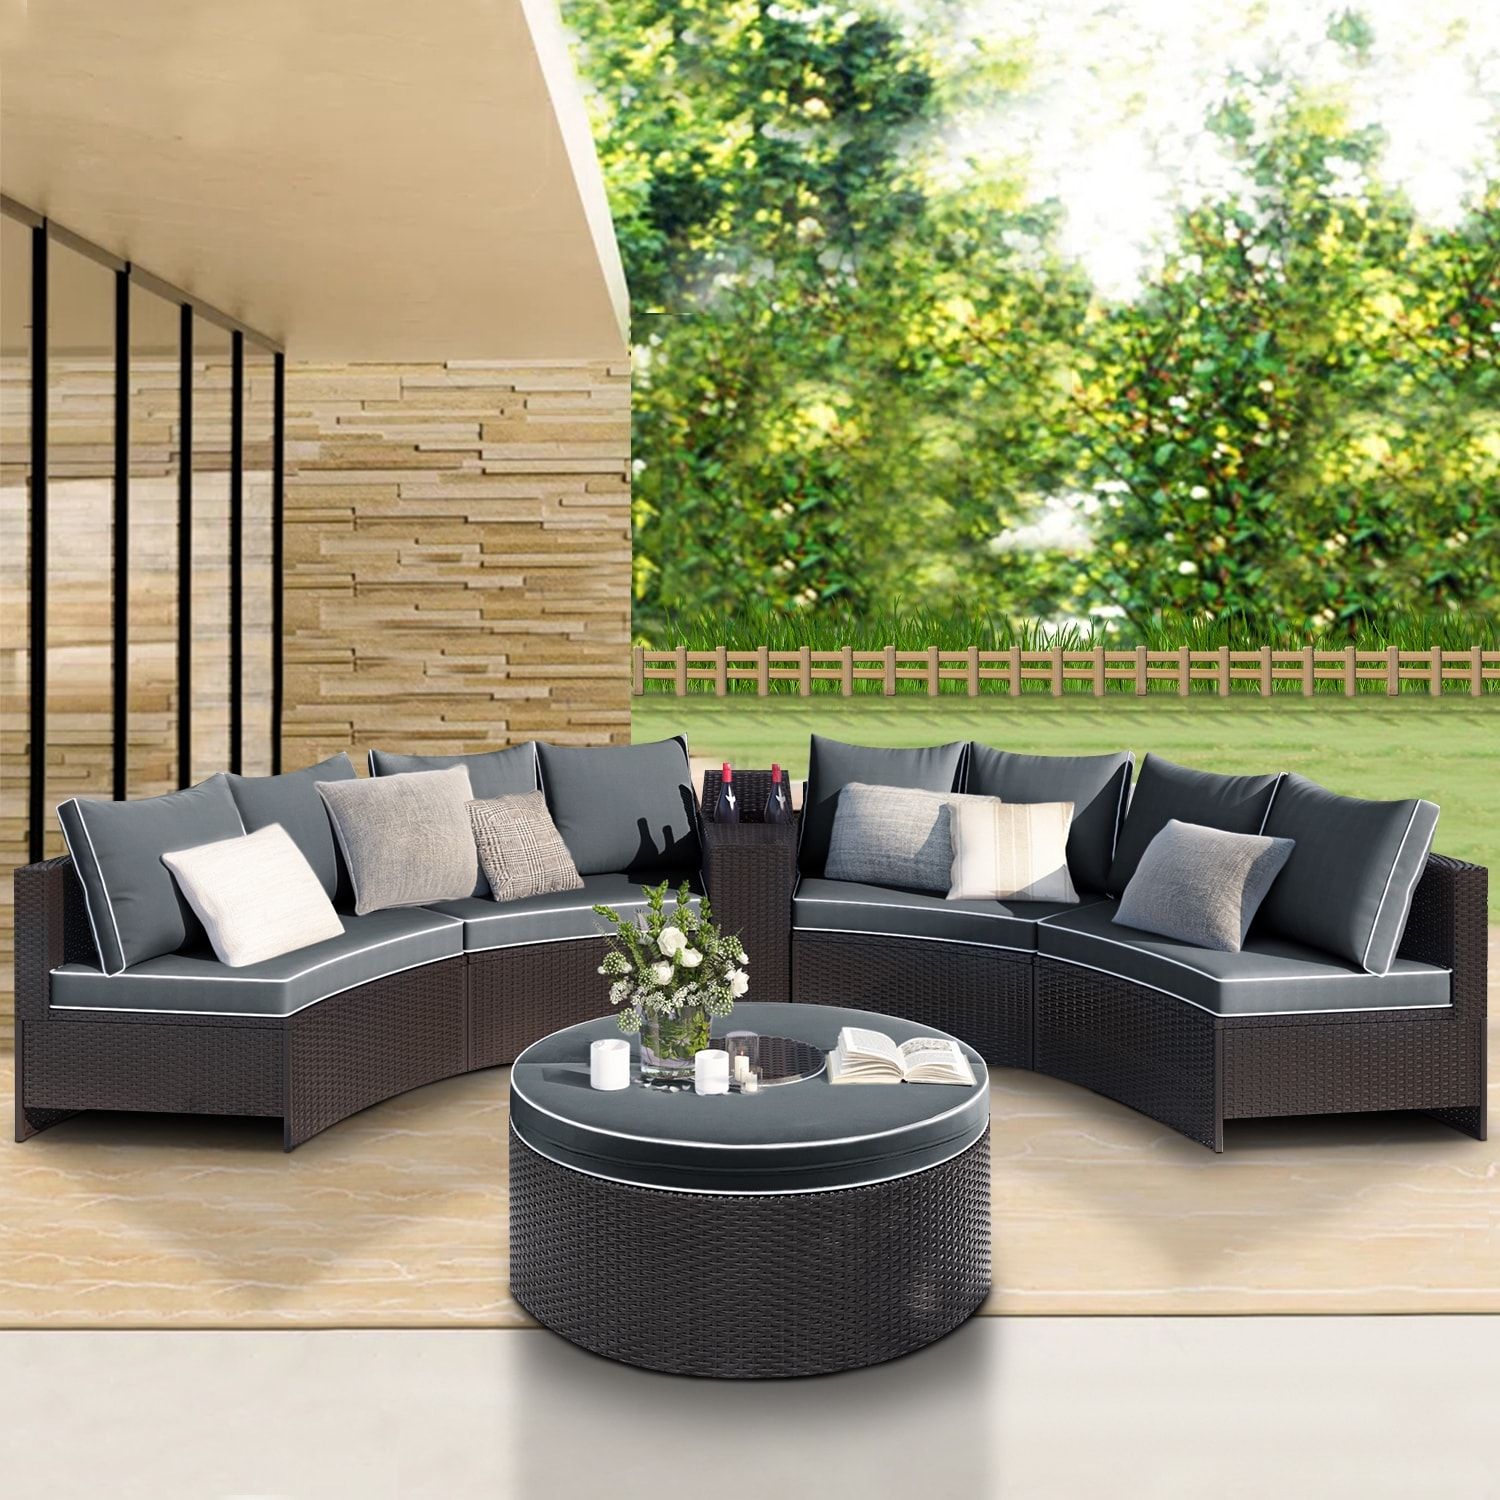 Maincraft 6 Pieces Outdoor Sectional Half Round Patio Rattan Sofa Set, Pe  Wicker Conversation Furniture Set W/ One Storage Side Table For Umbrella  And One Multifunctional Round Table, Brown+ Gray In The Intended For Outdoor Half Round Coffee Tables (View 8 of 15)